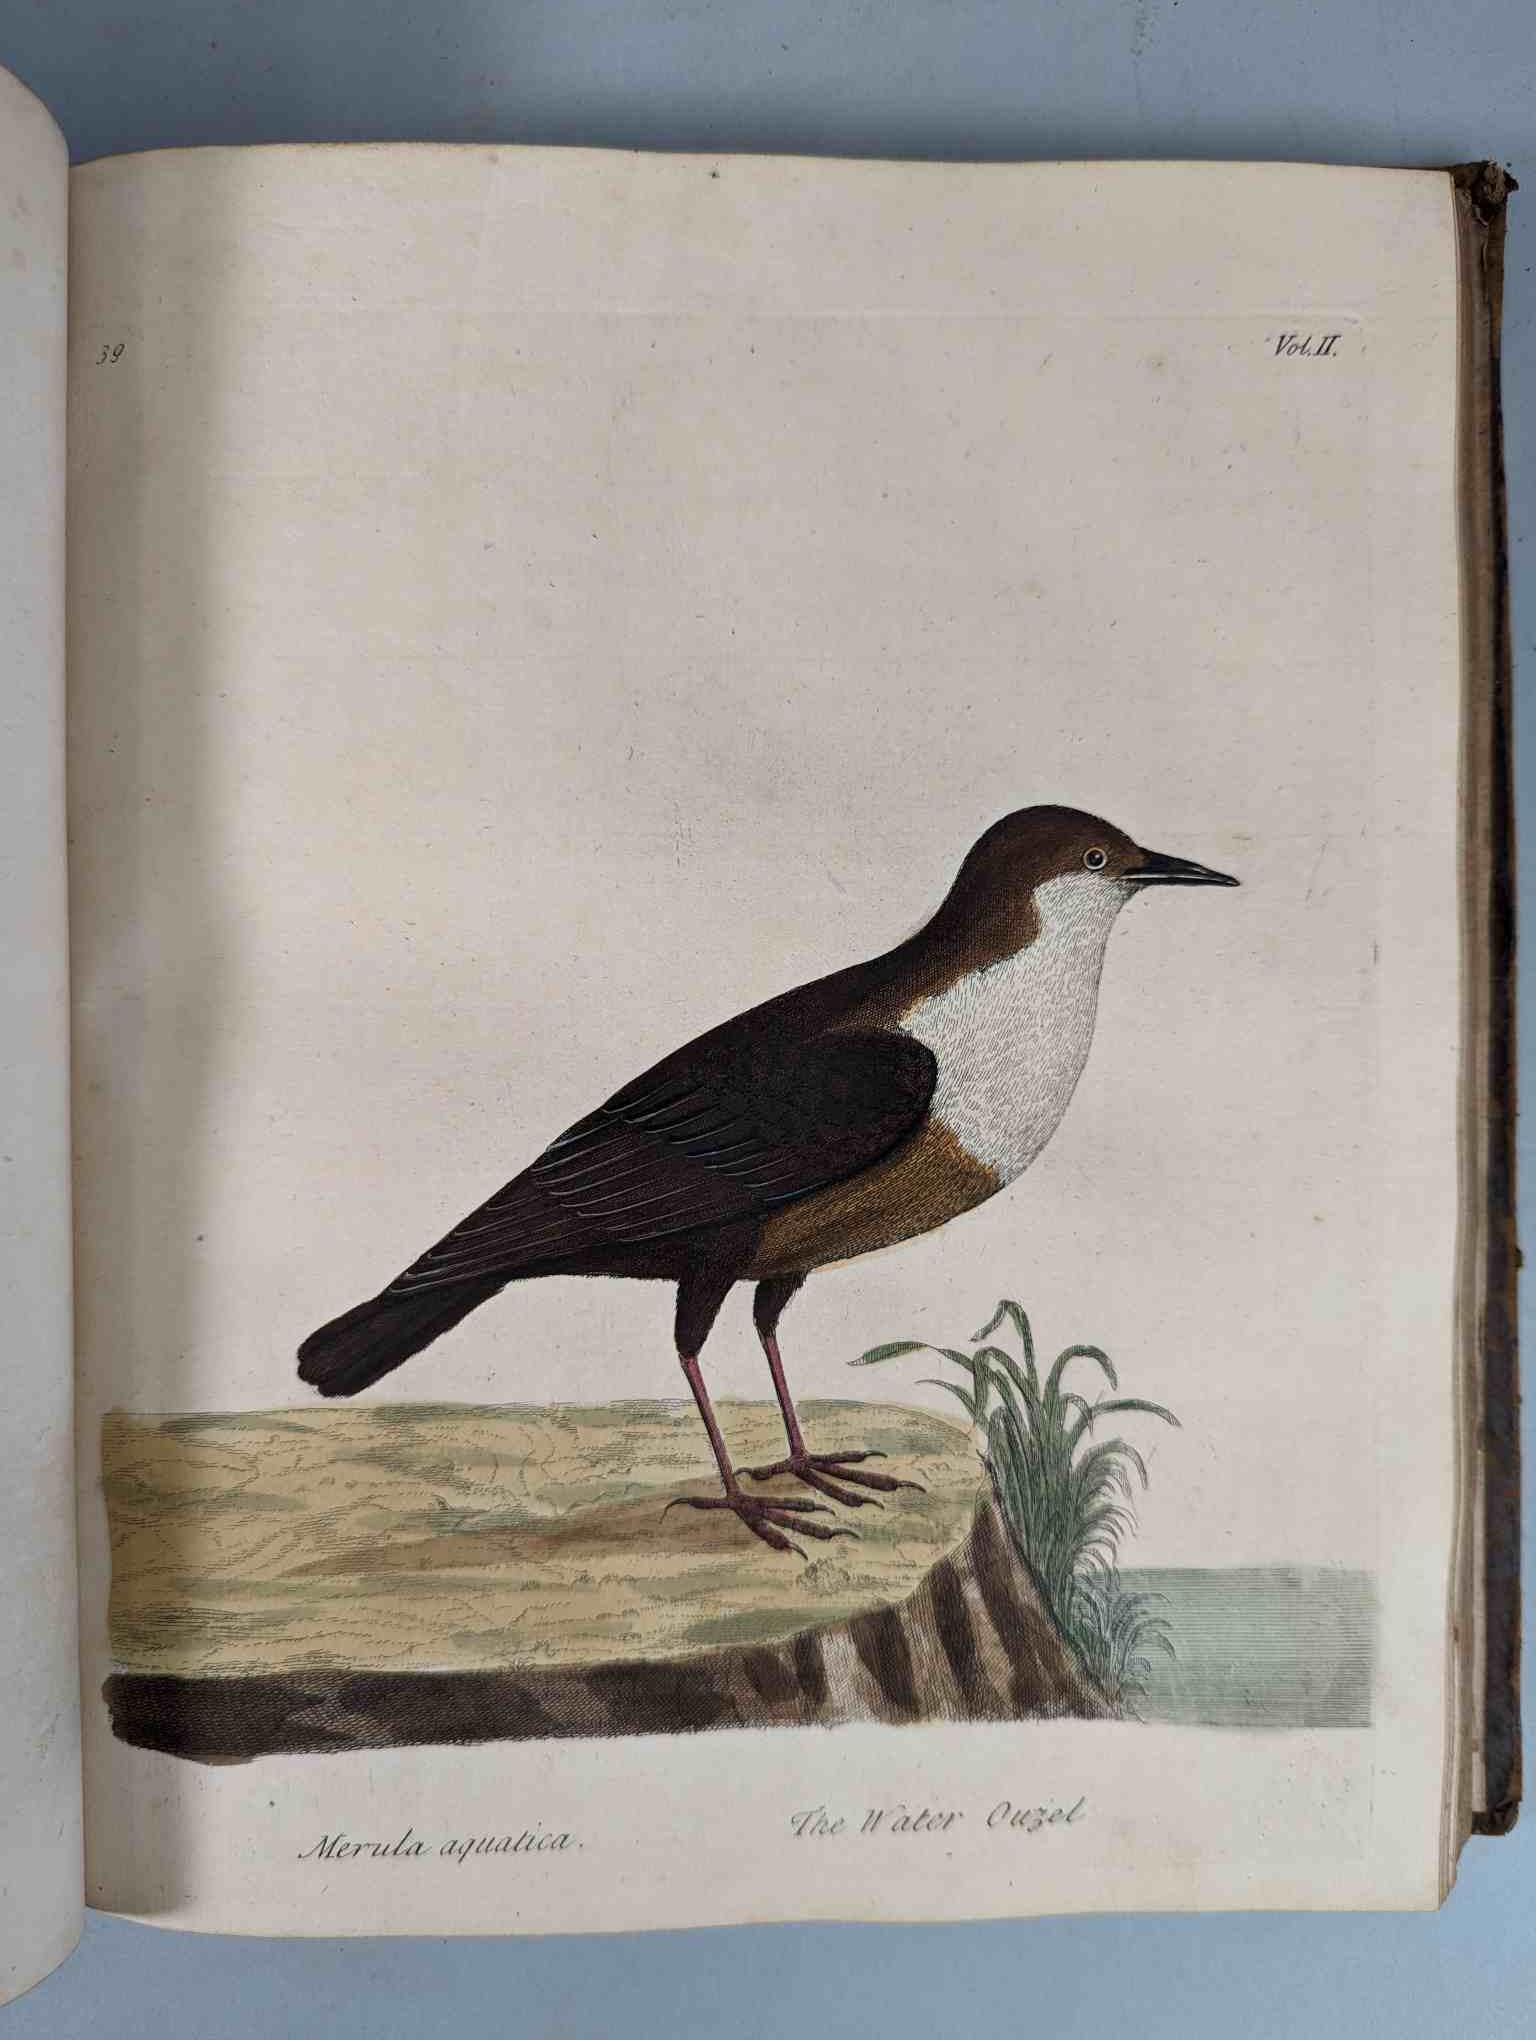 ALBIN, Eleazar. A Natural History of Birds, to which are added, Notes and Observations by W. - Image 143 of 208